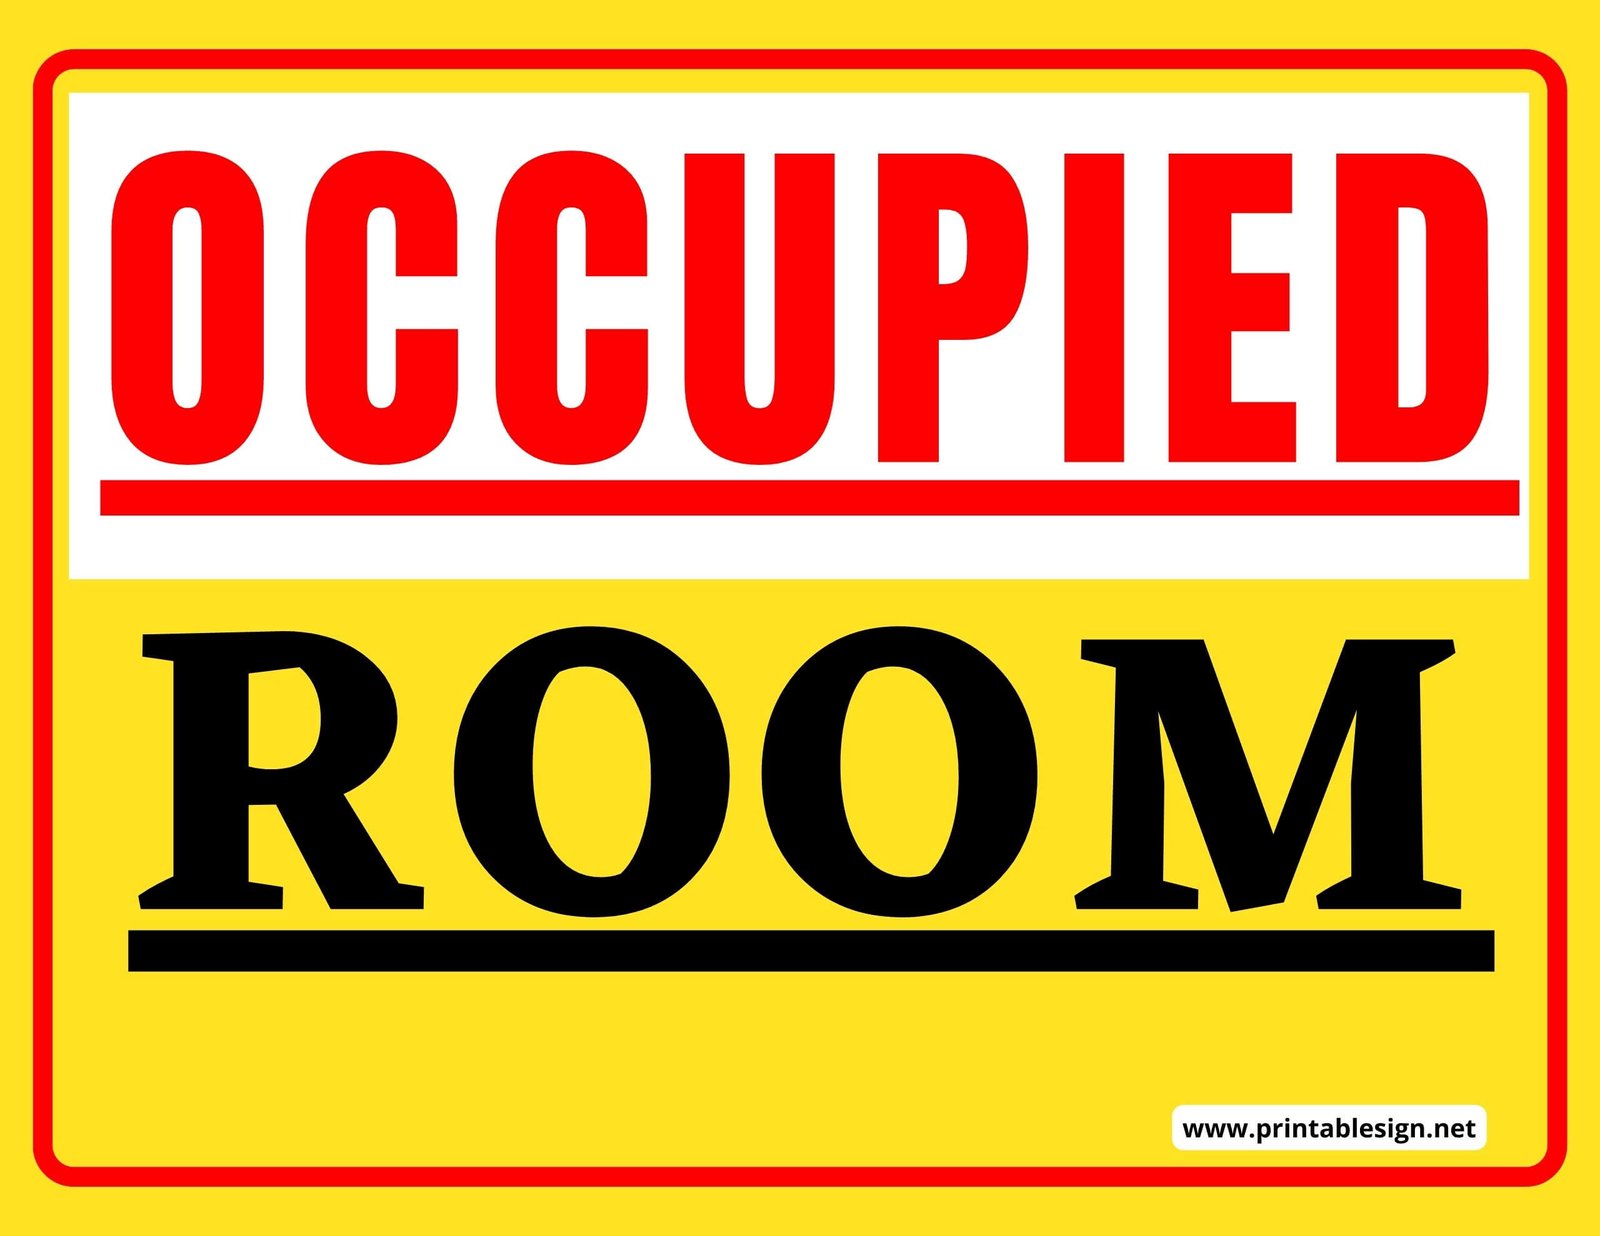 occupied-room-sign-free-download